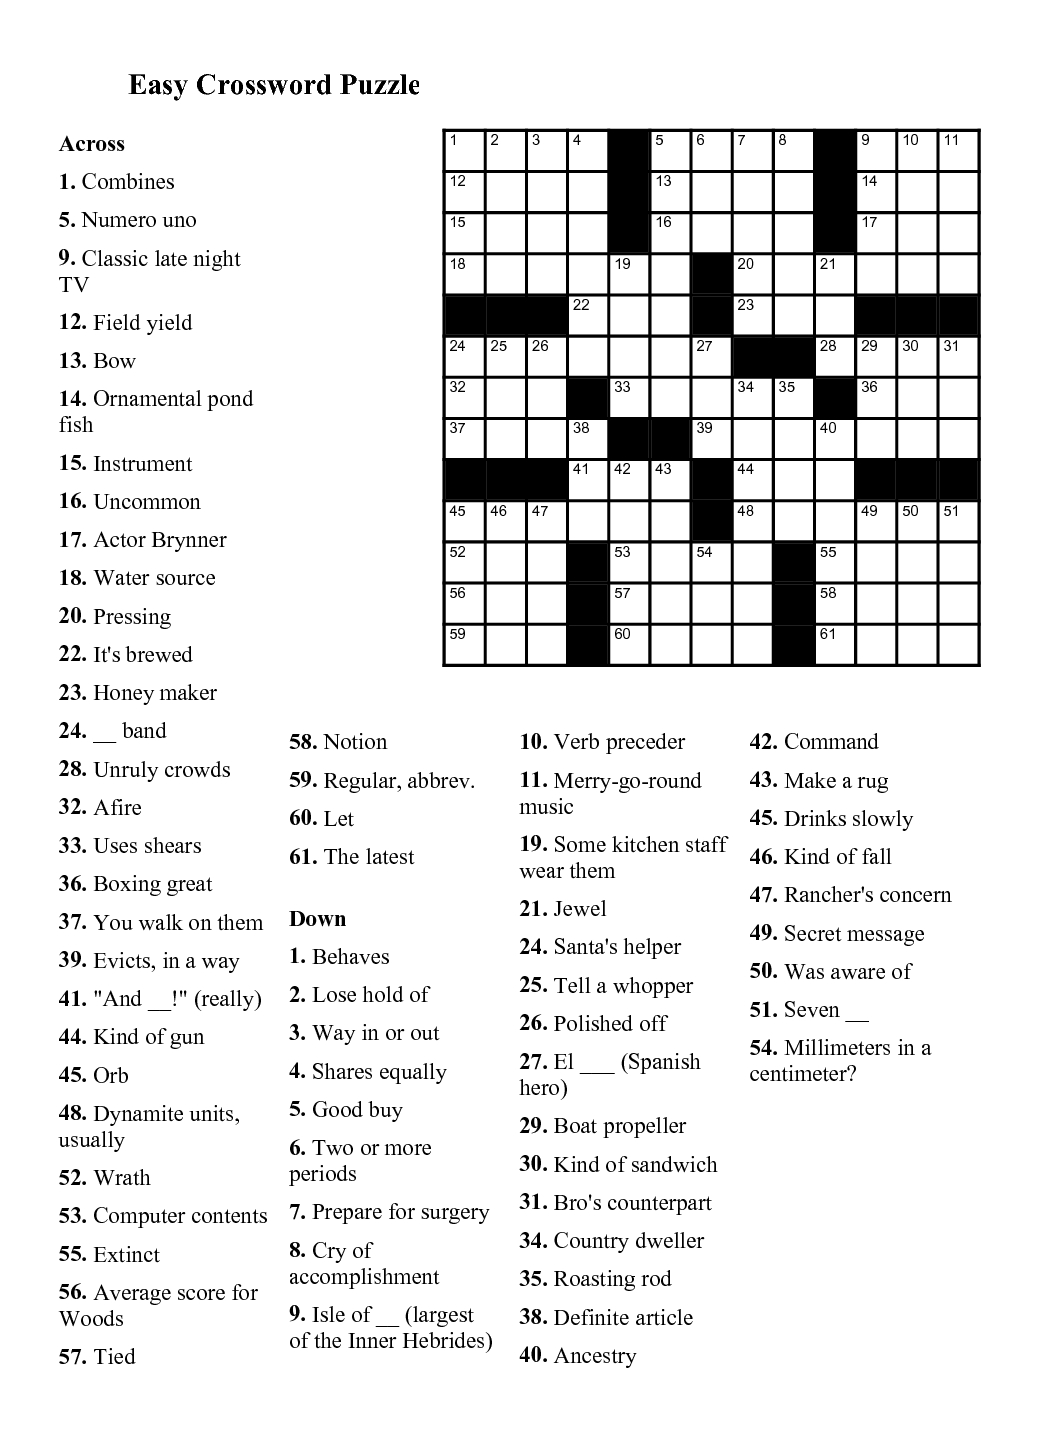 Easy Crossword Puzzles Printable Daily Template - Free Easy Printable Crossword Puzzles For Kids